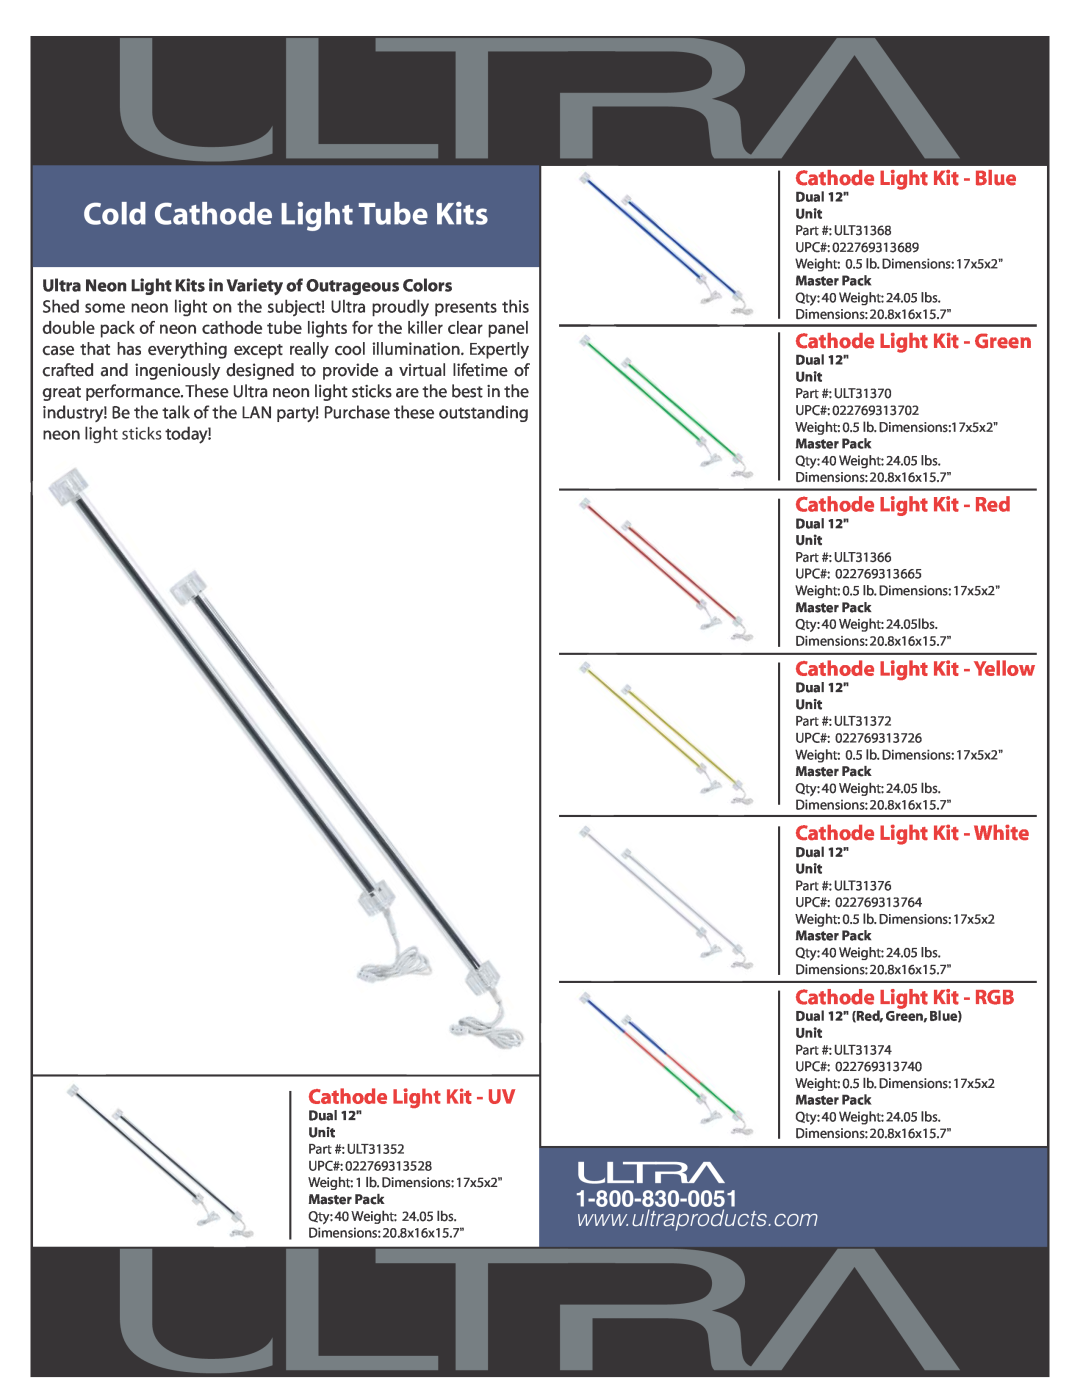 Ultra Products ULT31370 dimensions Cold Cathode Light Tube Kits, Cathode Light Kit - UV, Cathode Light Kit - Blue 